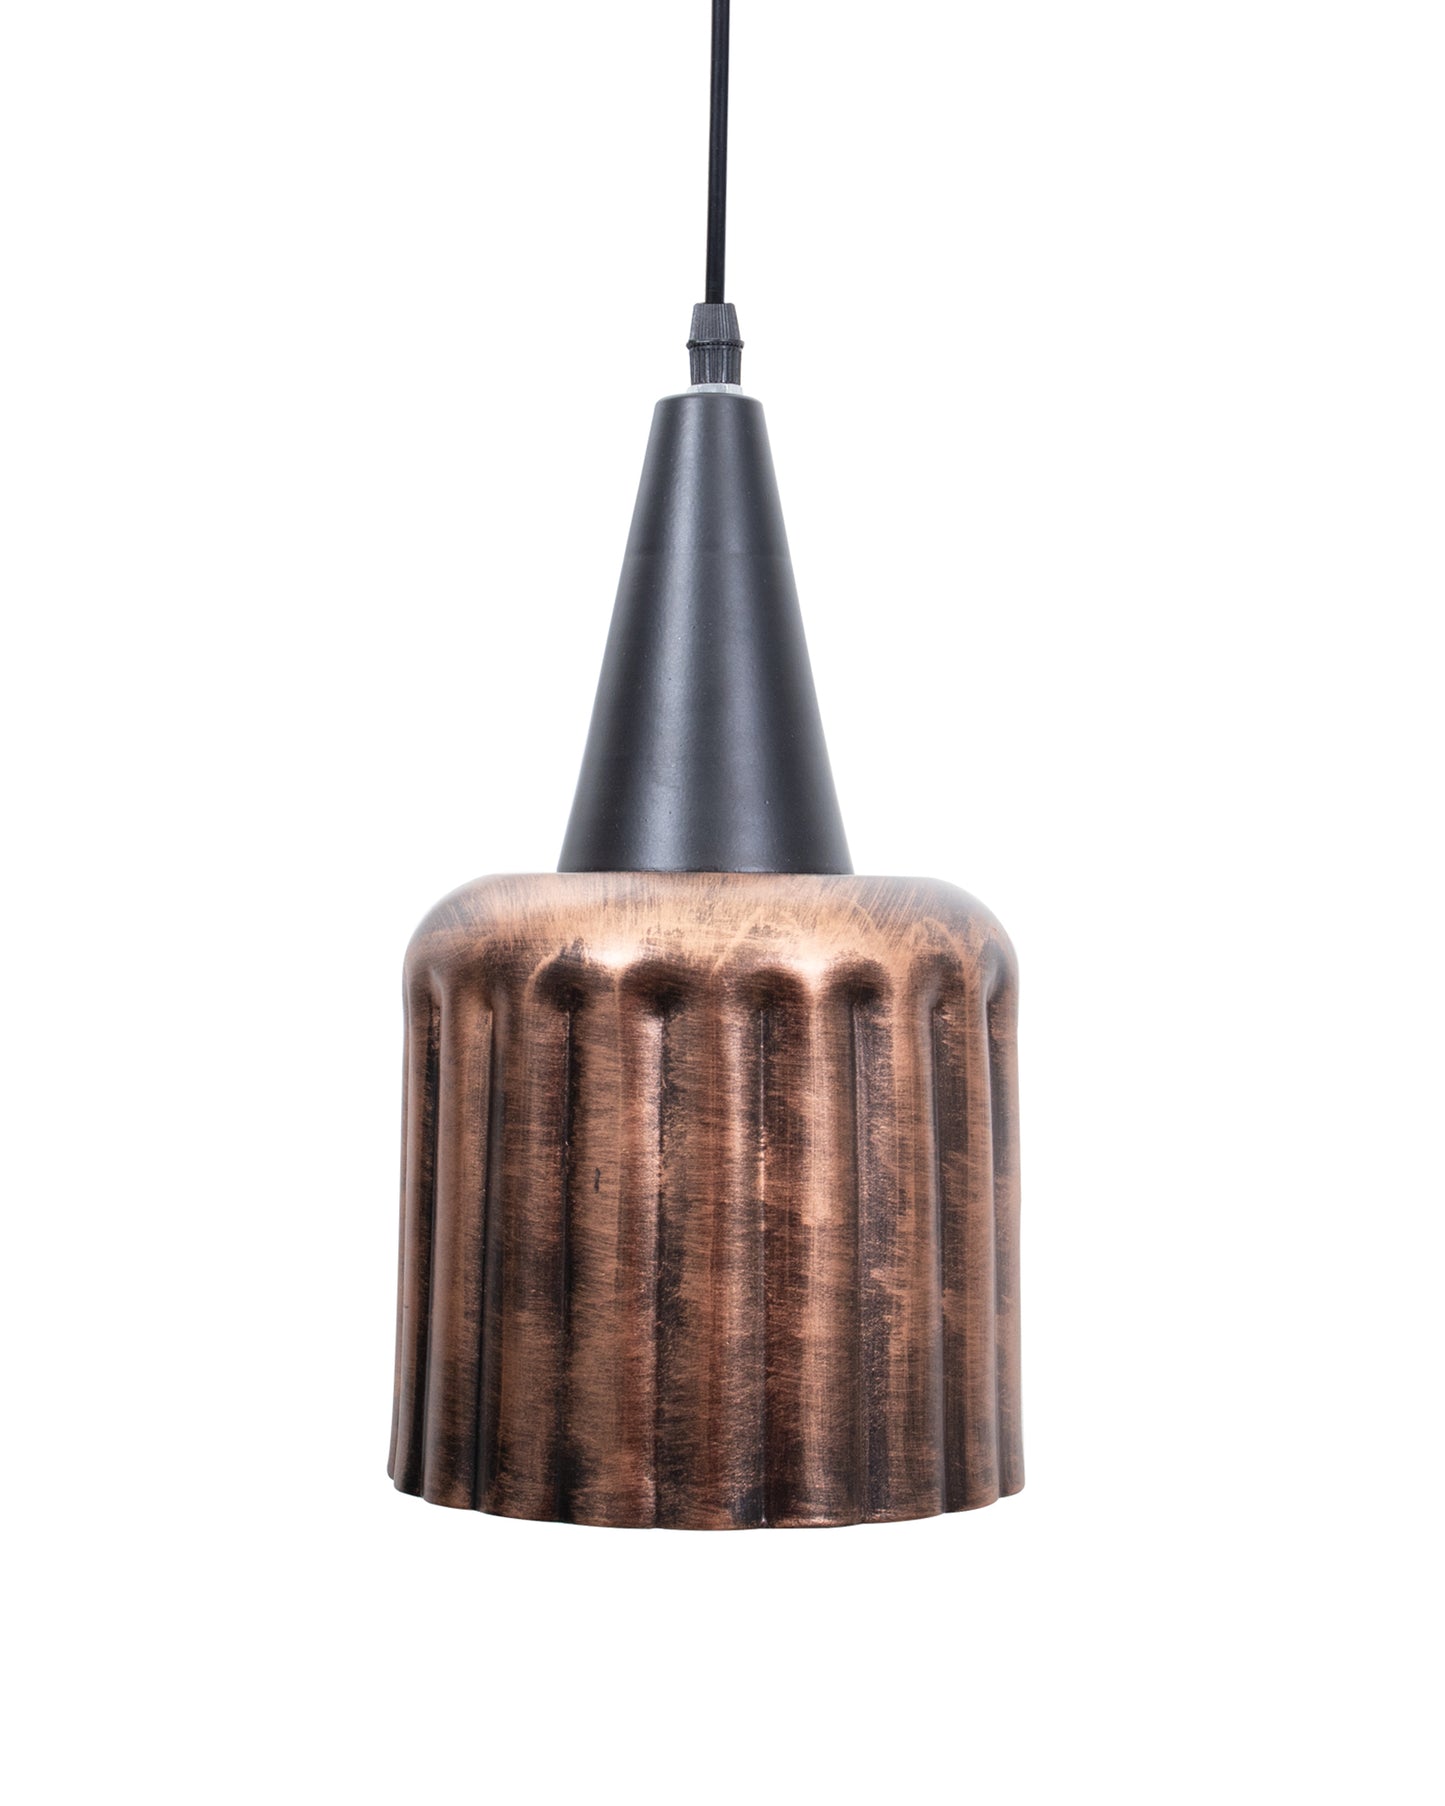 Toned Oil Rubbed Vintage Metal Ceiling Lamp